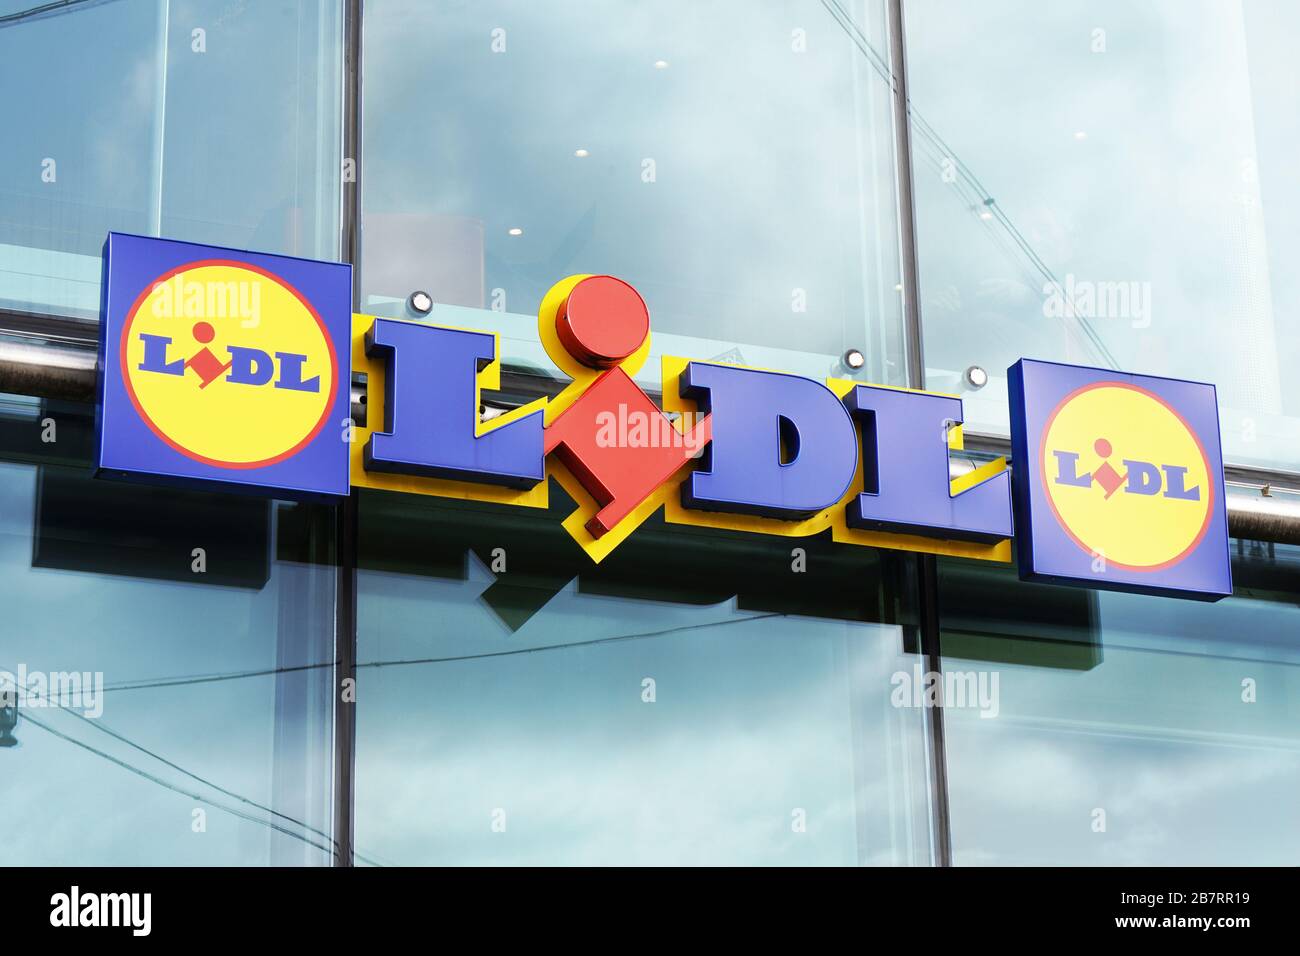 Hannover, Germany - March 02, 2020: Lidl logo sign at local branch of german discounter supermarket chain Stock Photo